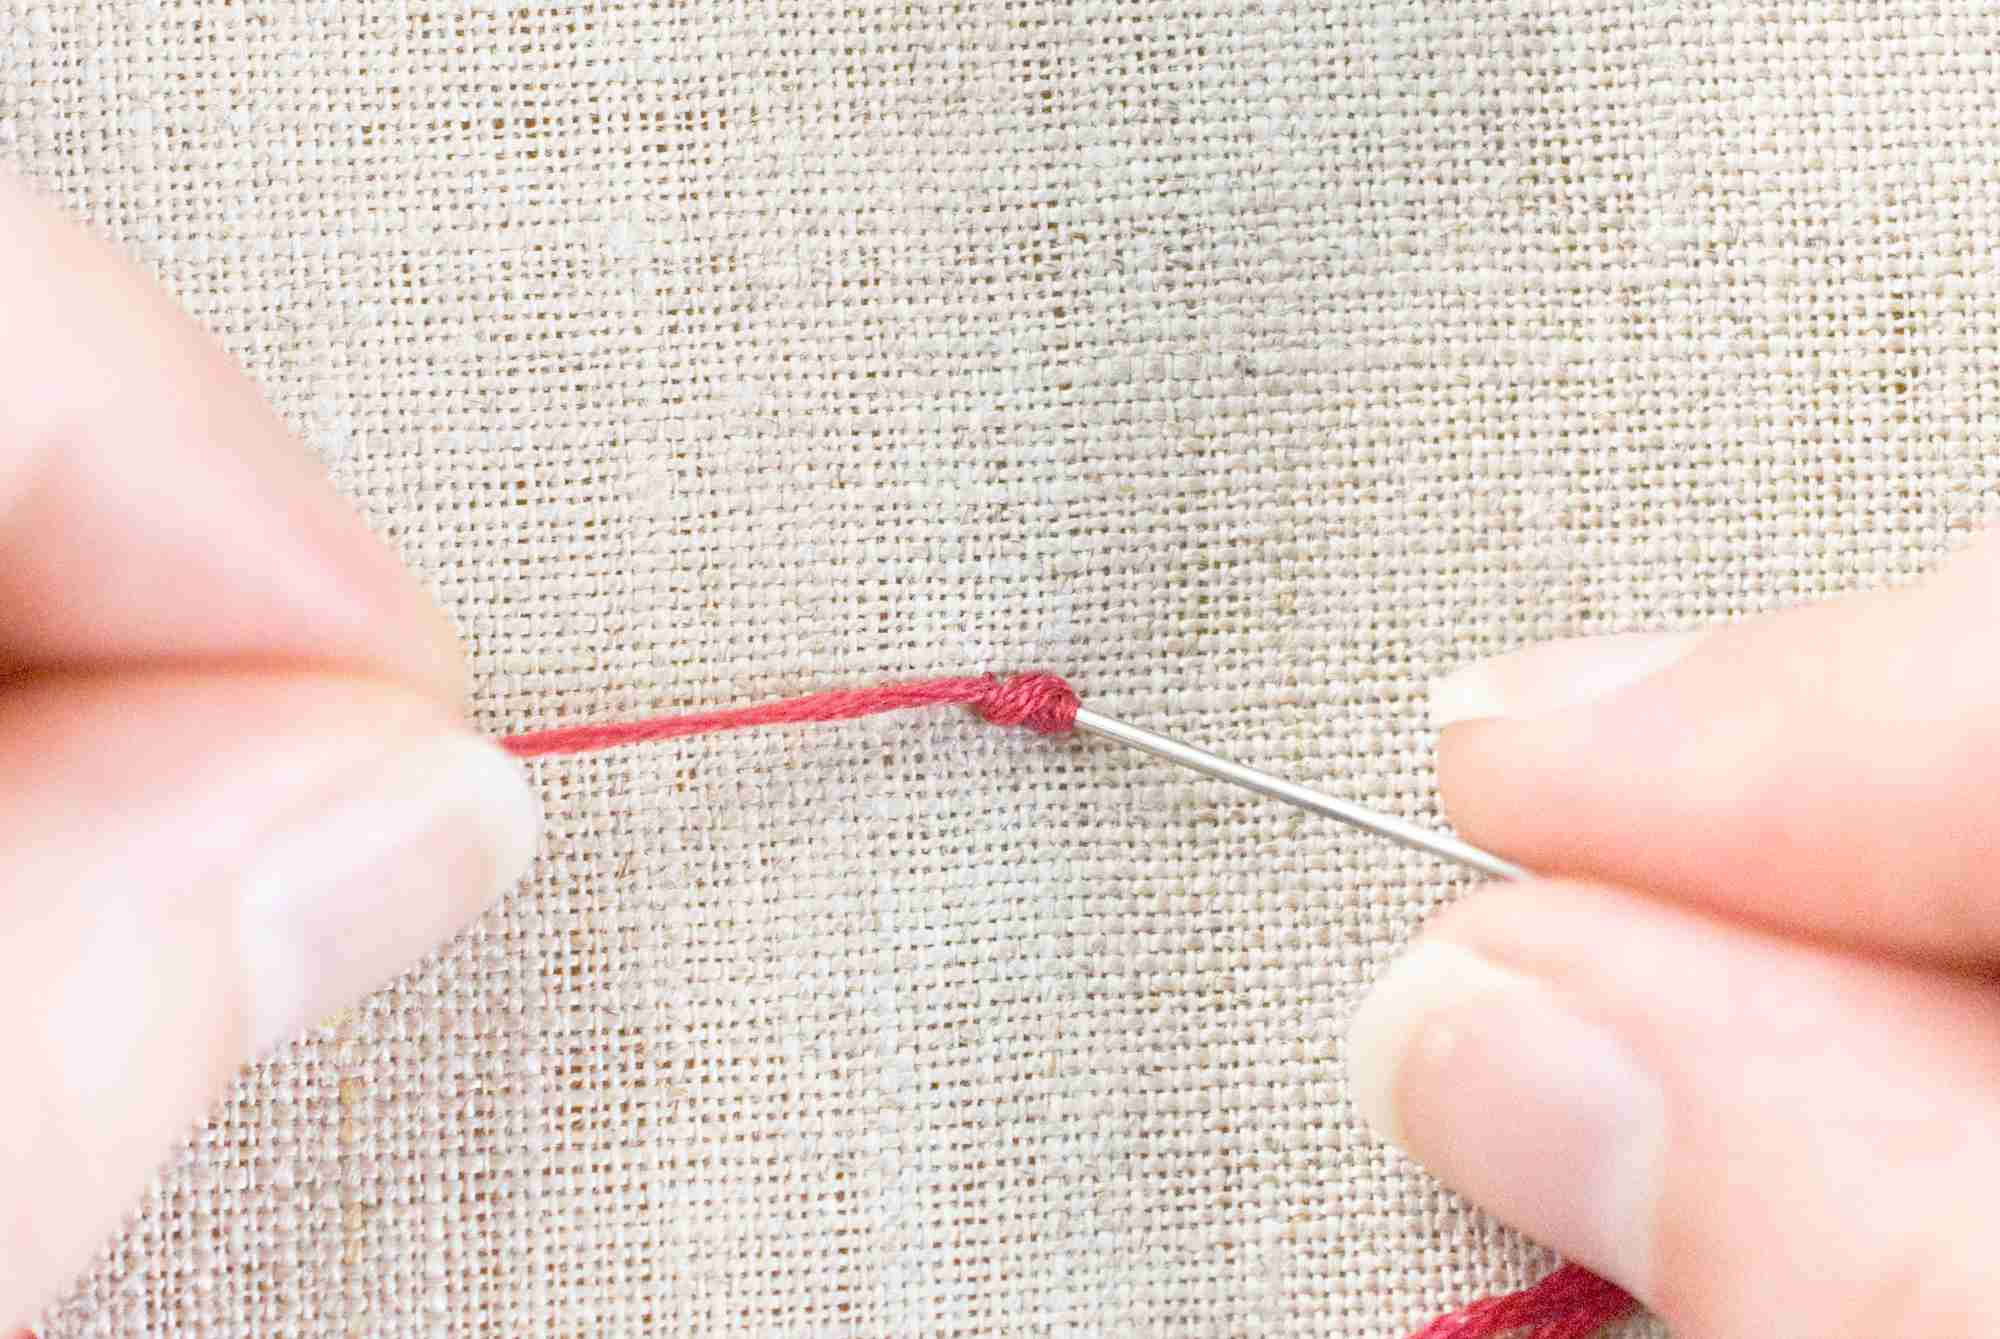 French Knots Embroidery Patterns How To Make A French Knot Easily